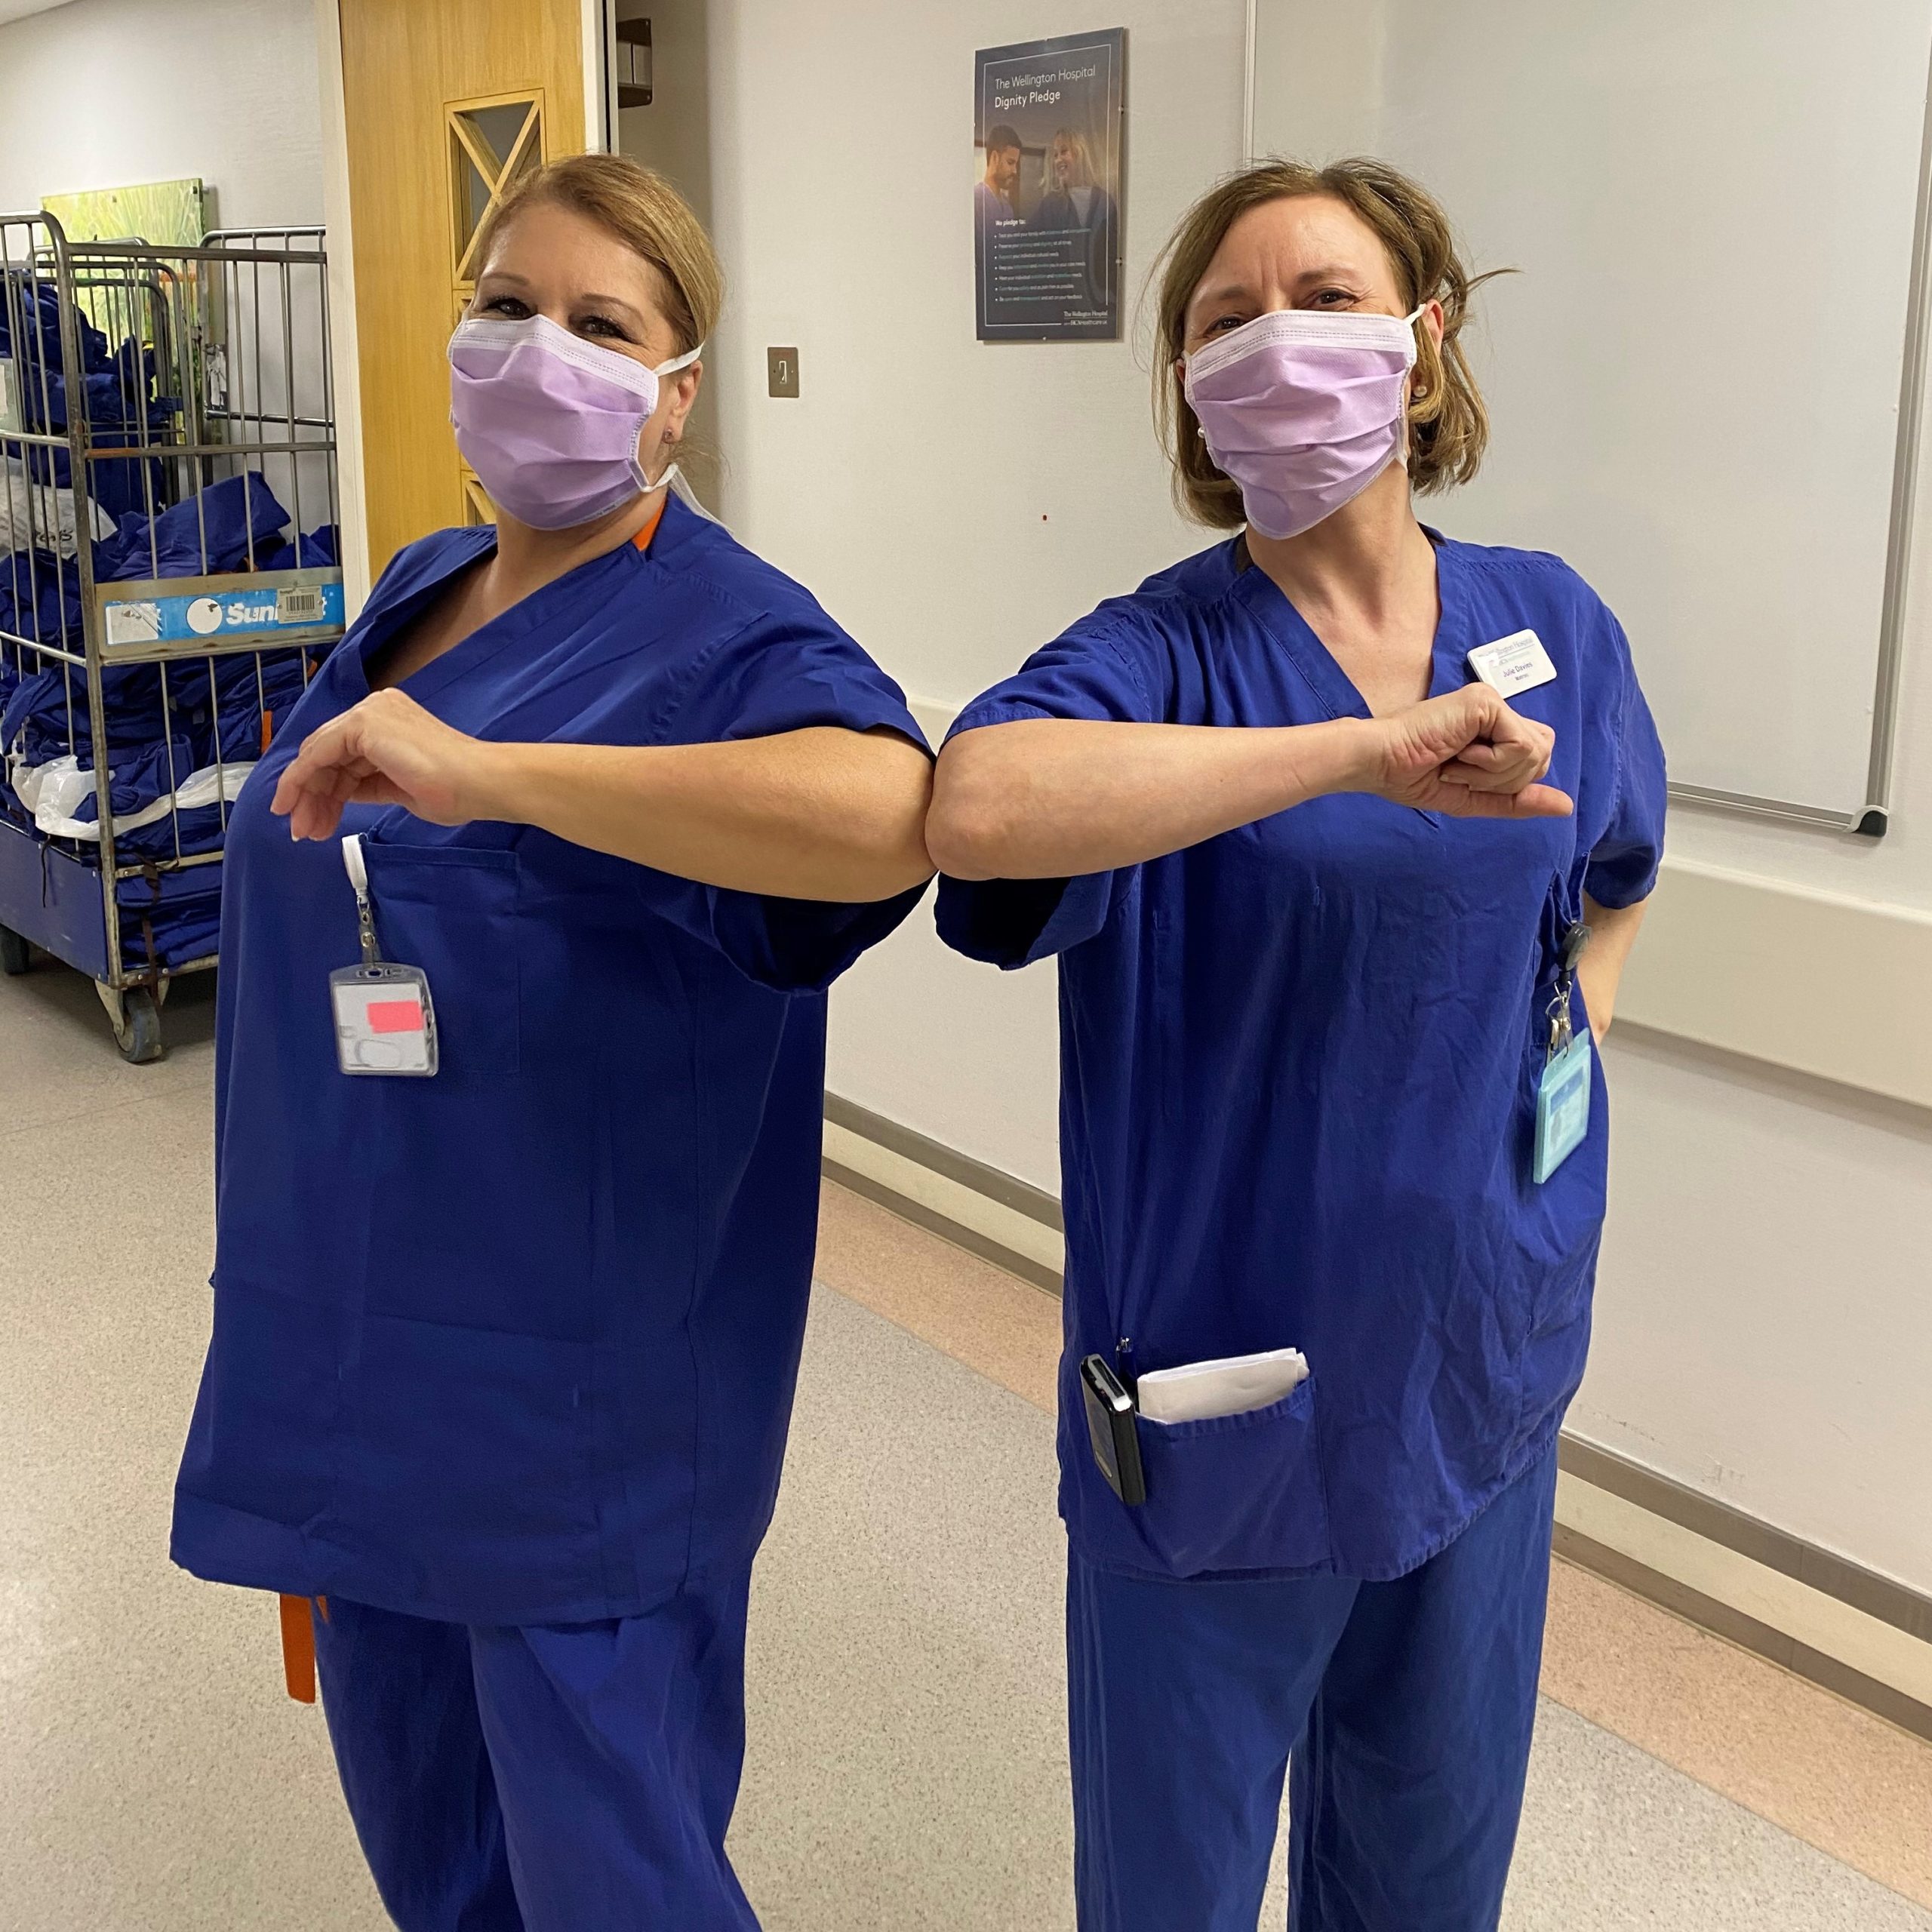 Two female nurses wearing face masks and bumping elbows 